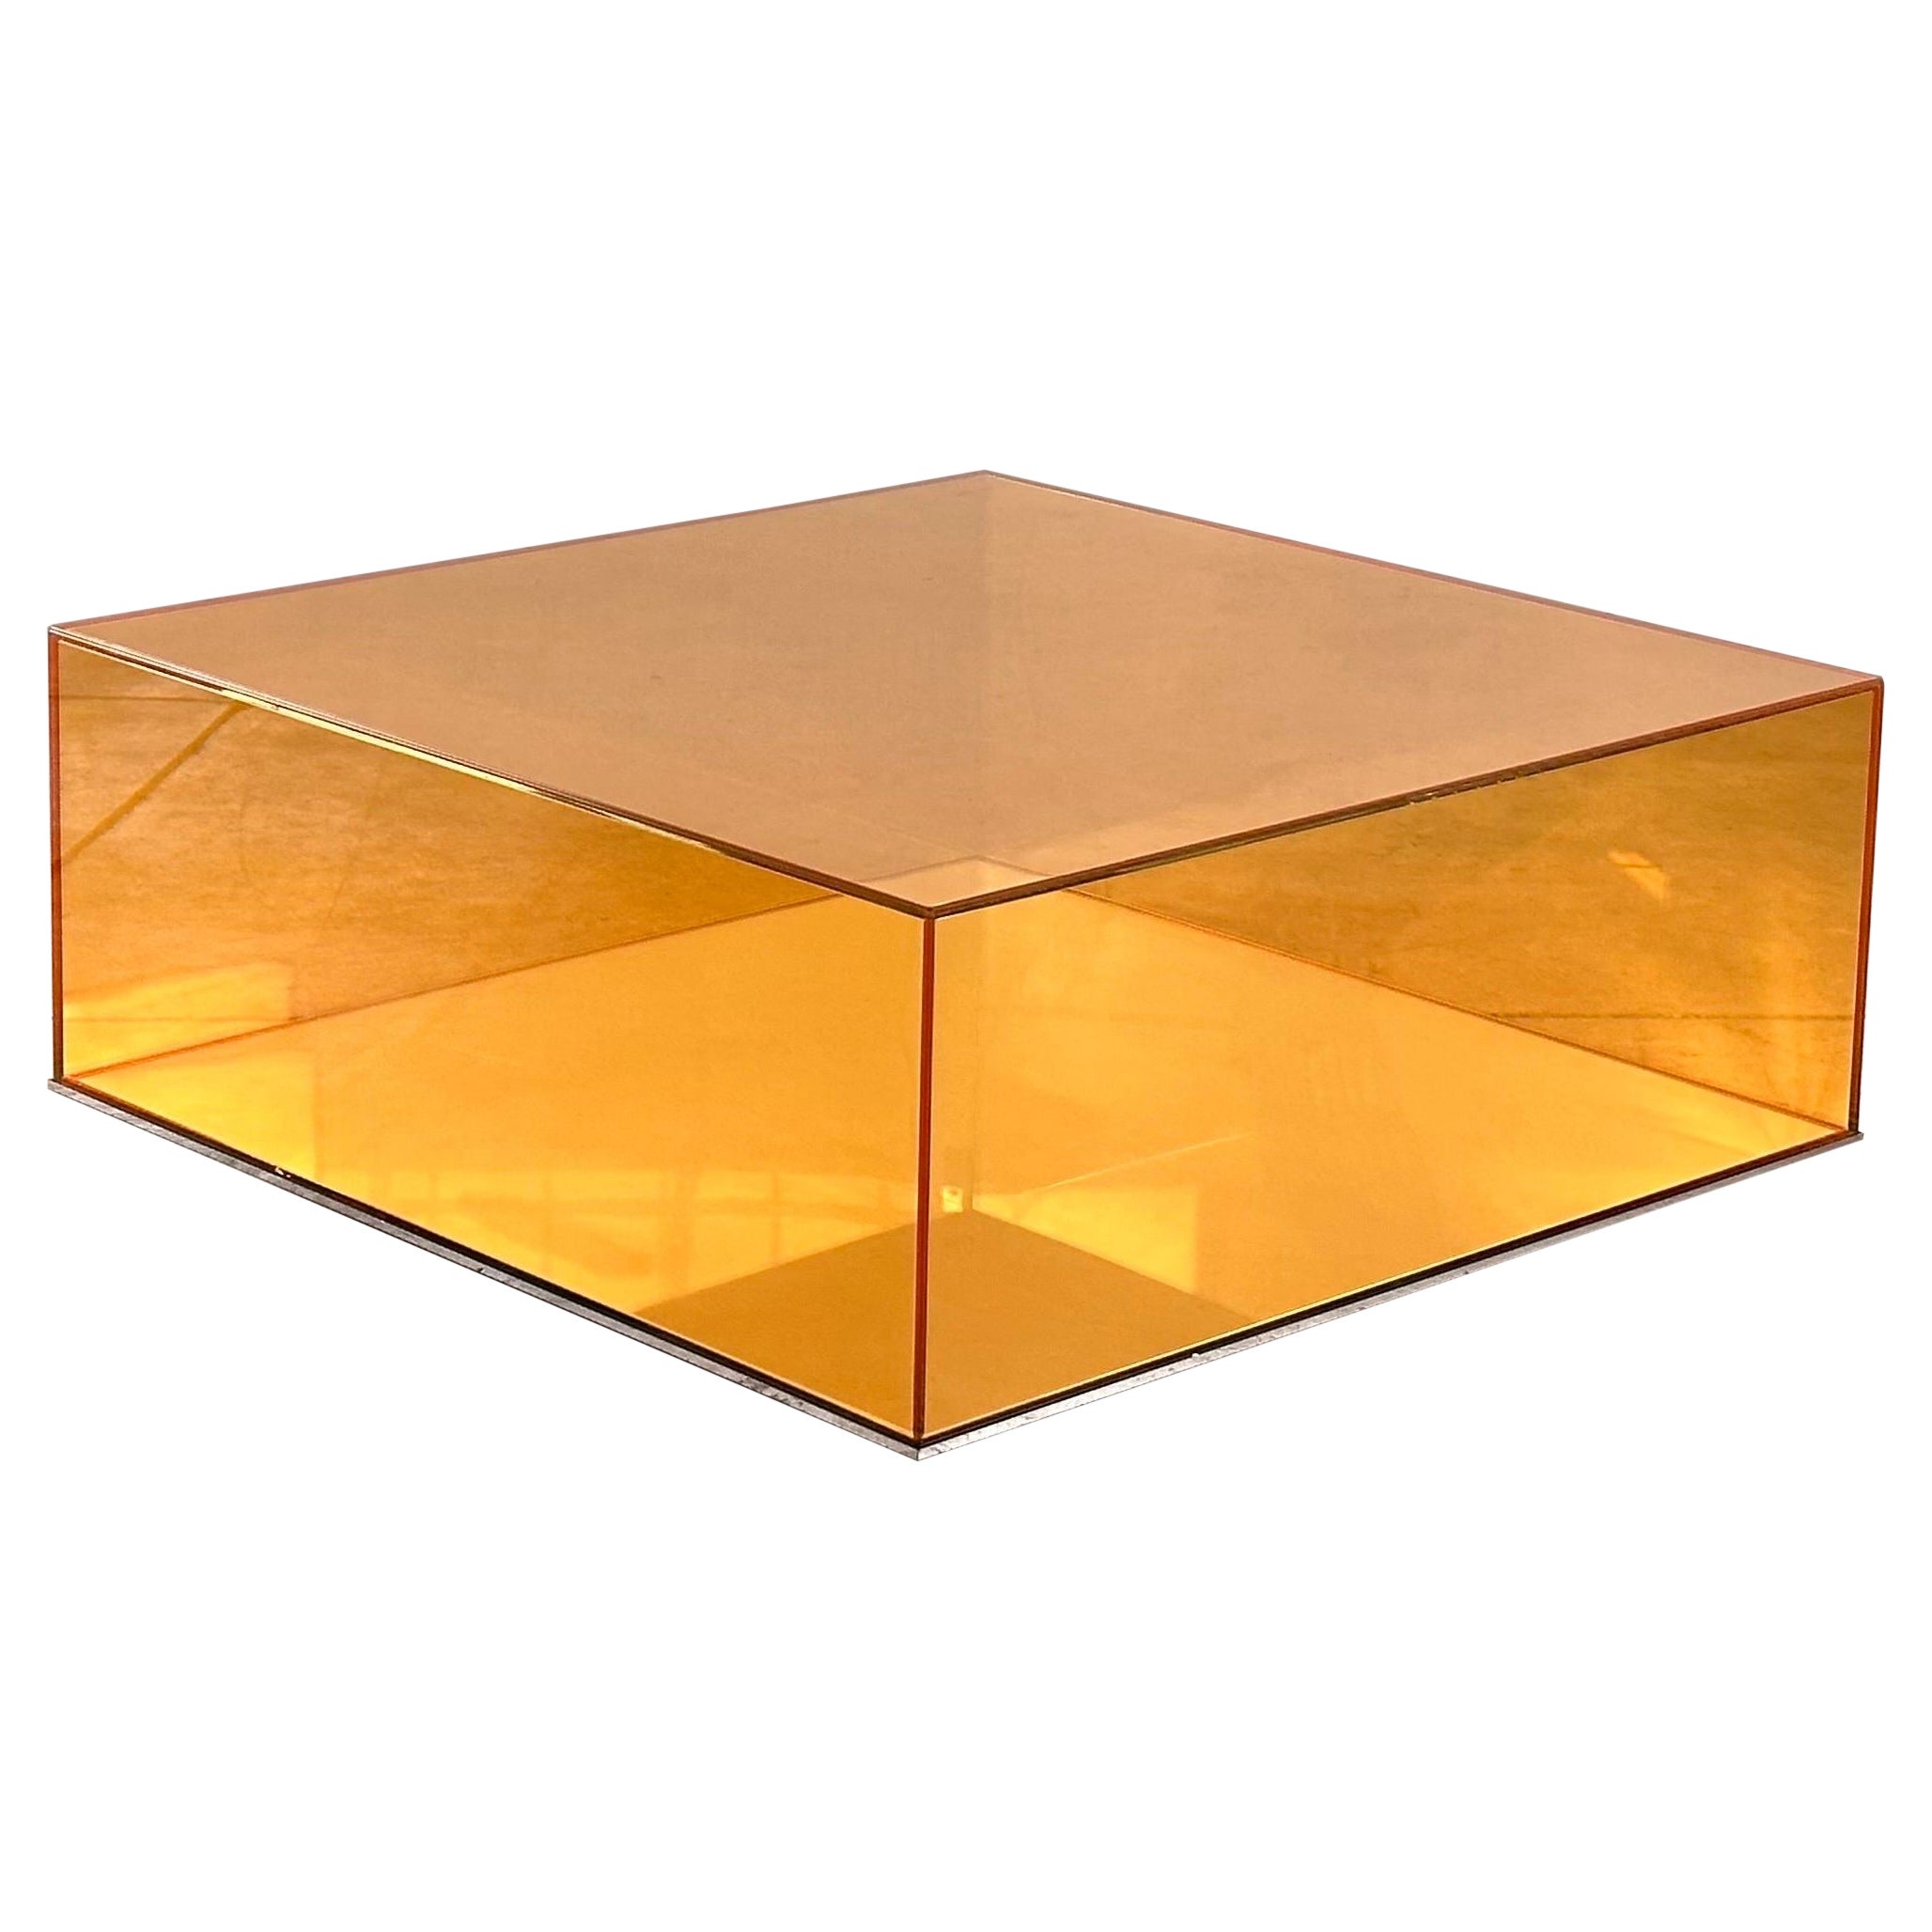 Exquisite "Donald" Stained Glass Coffee Table by Philippe Starck for Glas Italia For Sale